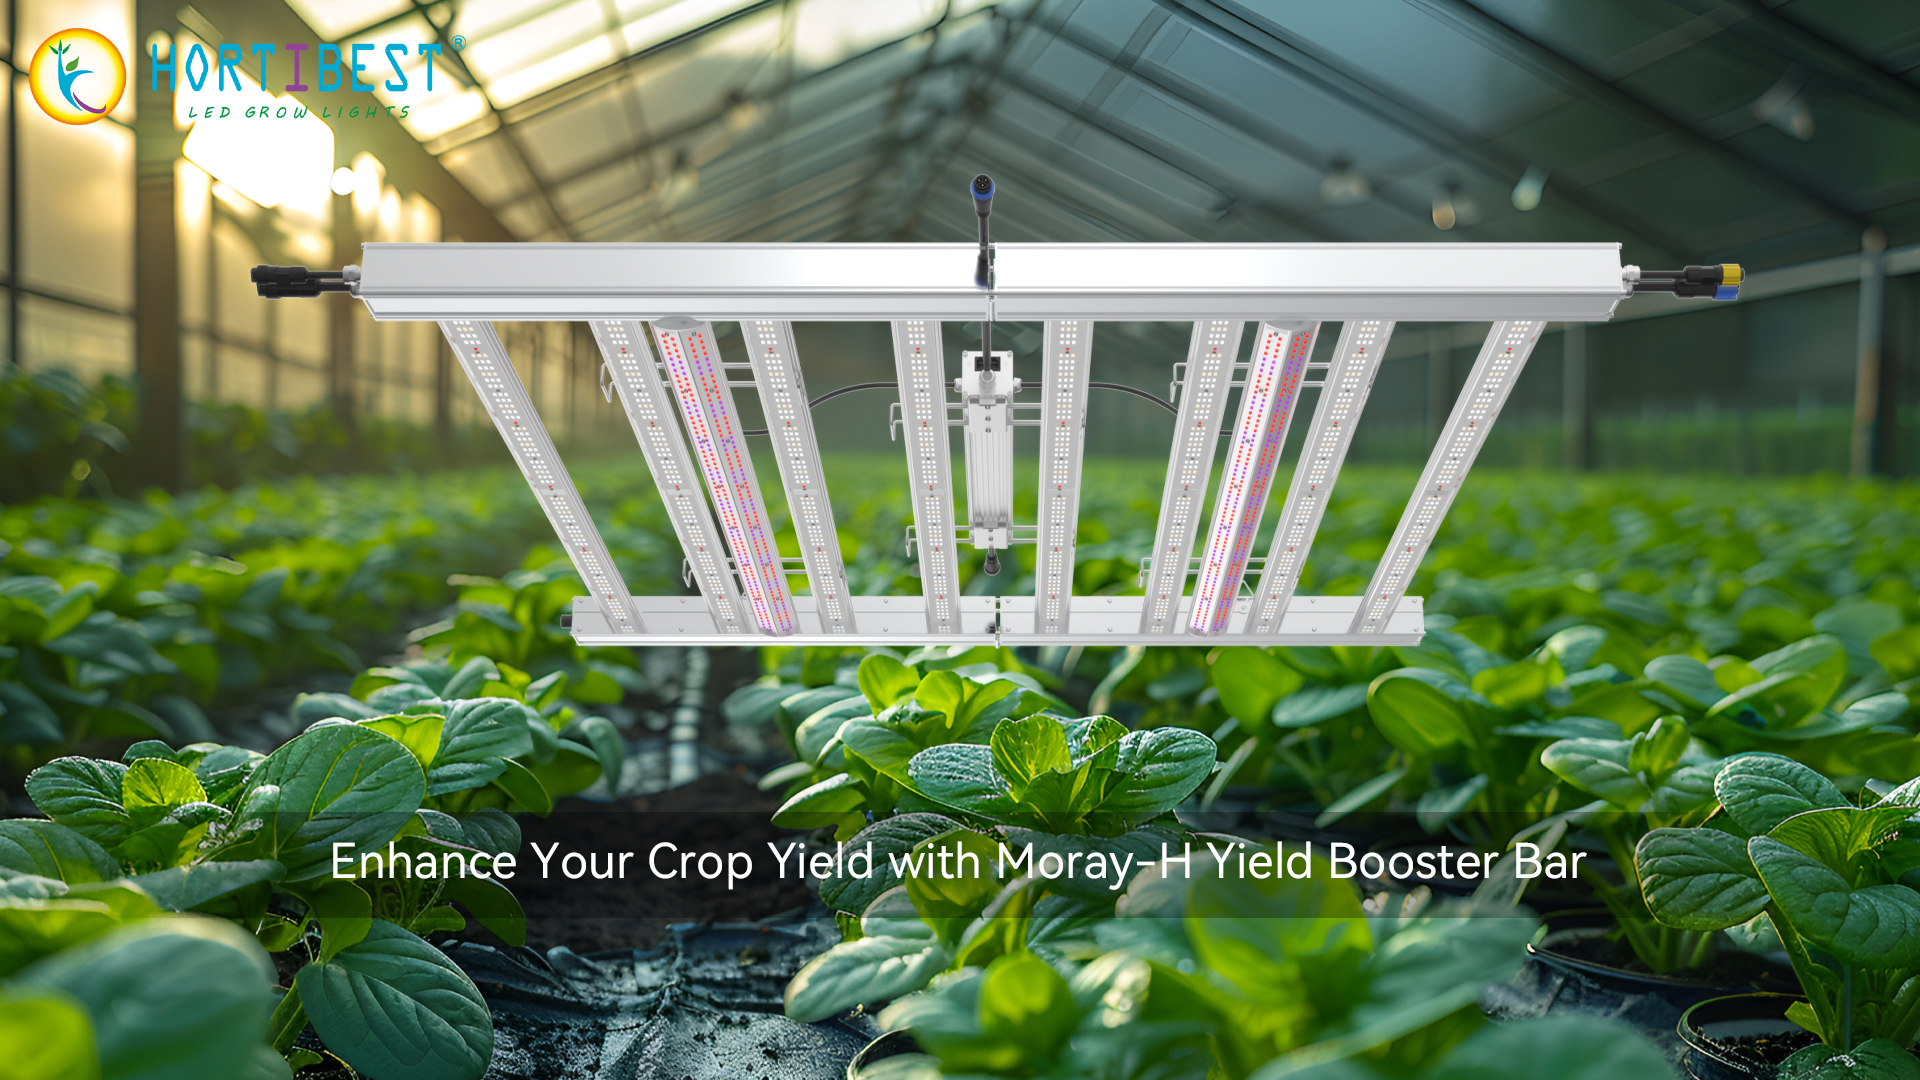 Enhance Your Crop Yield with Moray-H Yield Booster Bar